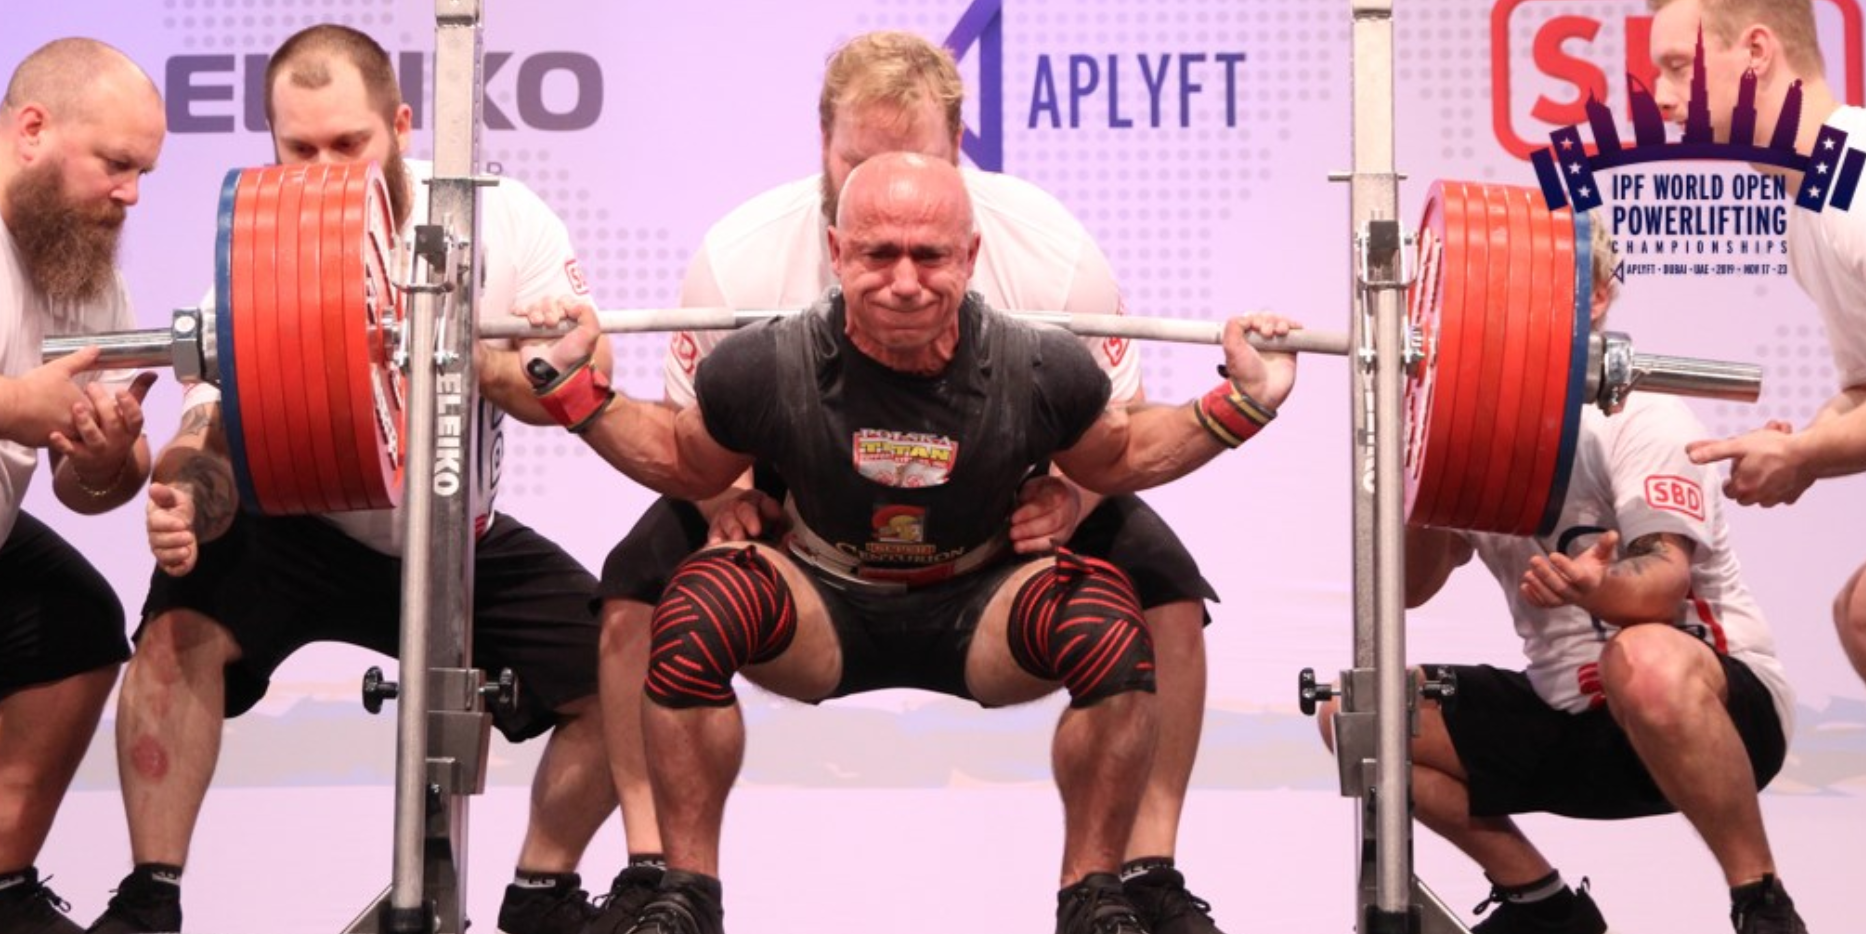 How the World Open Powerlifting Championships